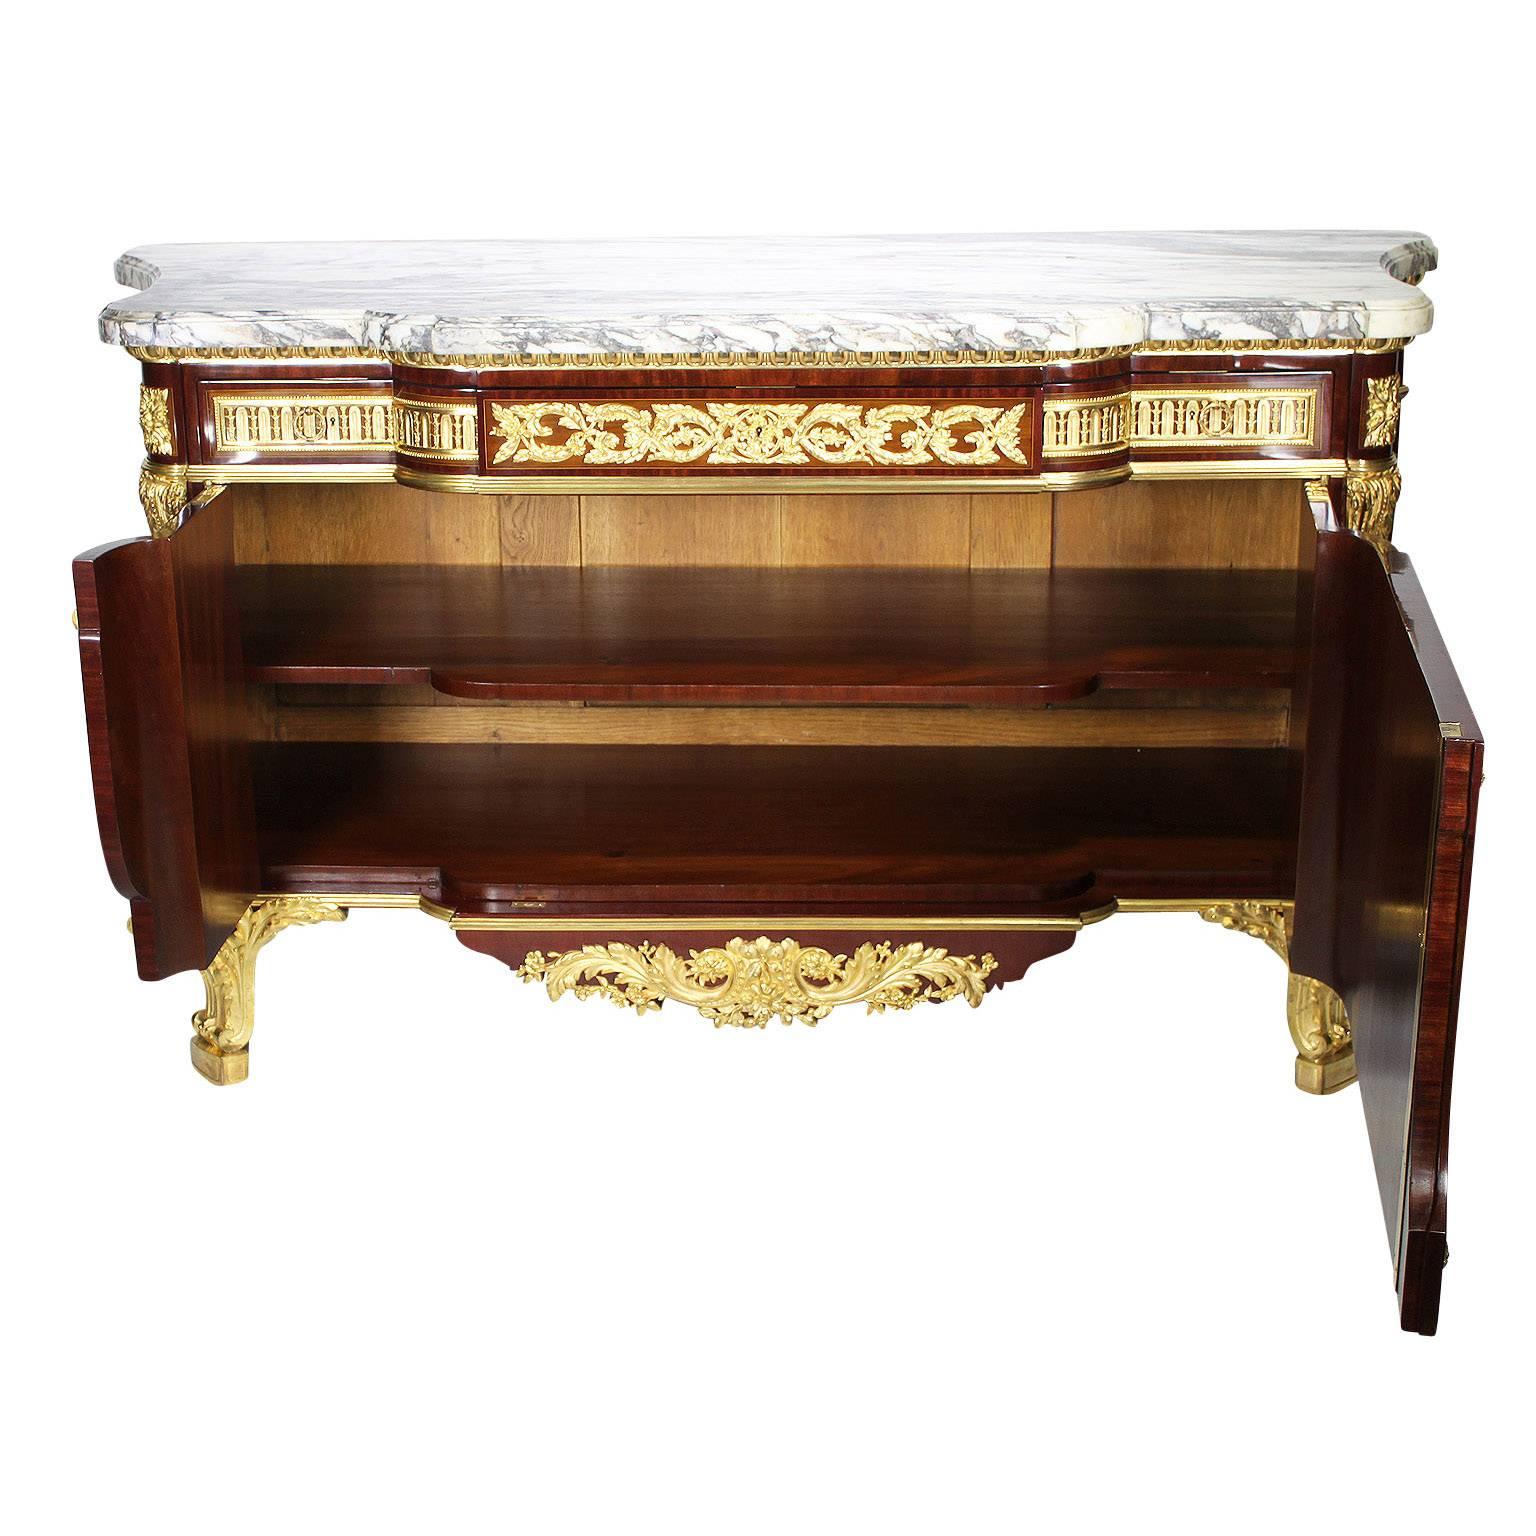 Fine French 19th Century Louis XVI Style Ormolu-Mounted Tulipwood Commode For Sale 2